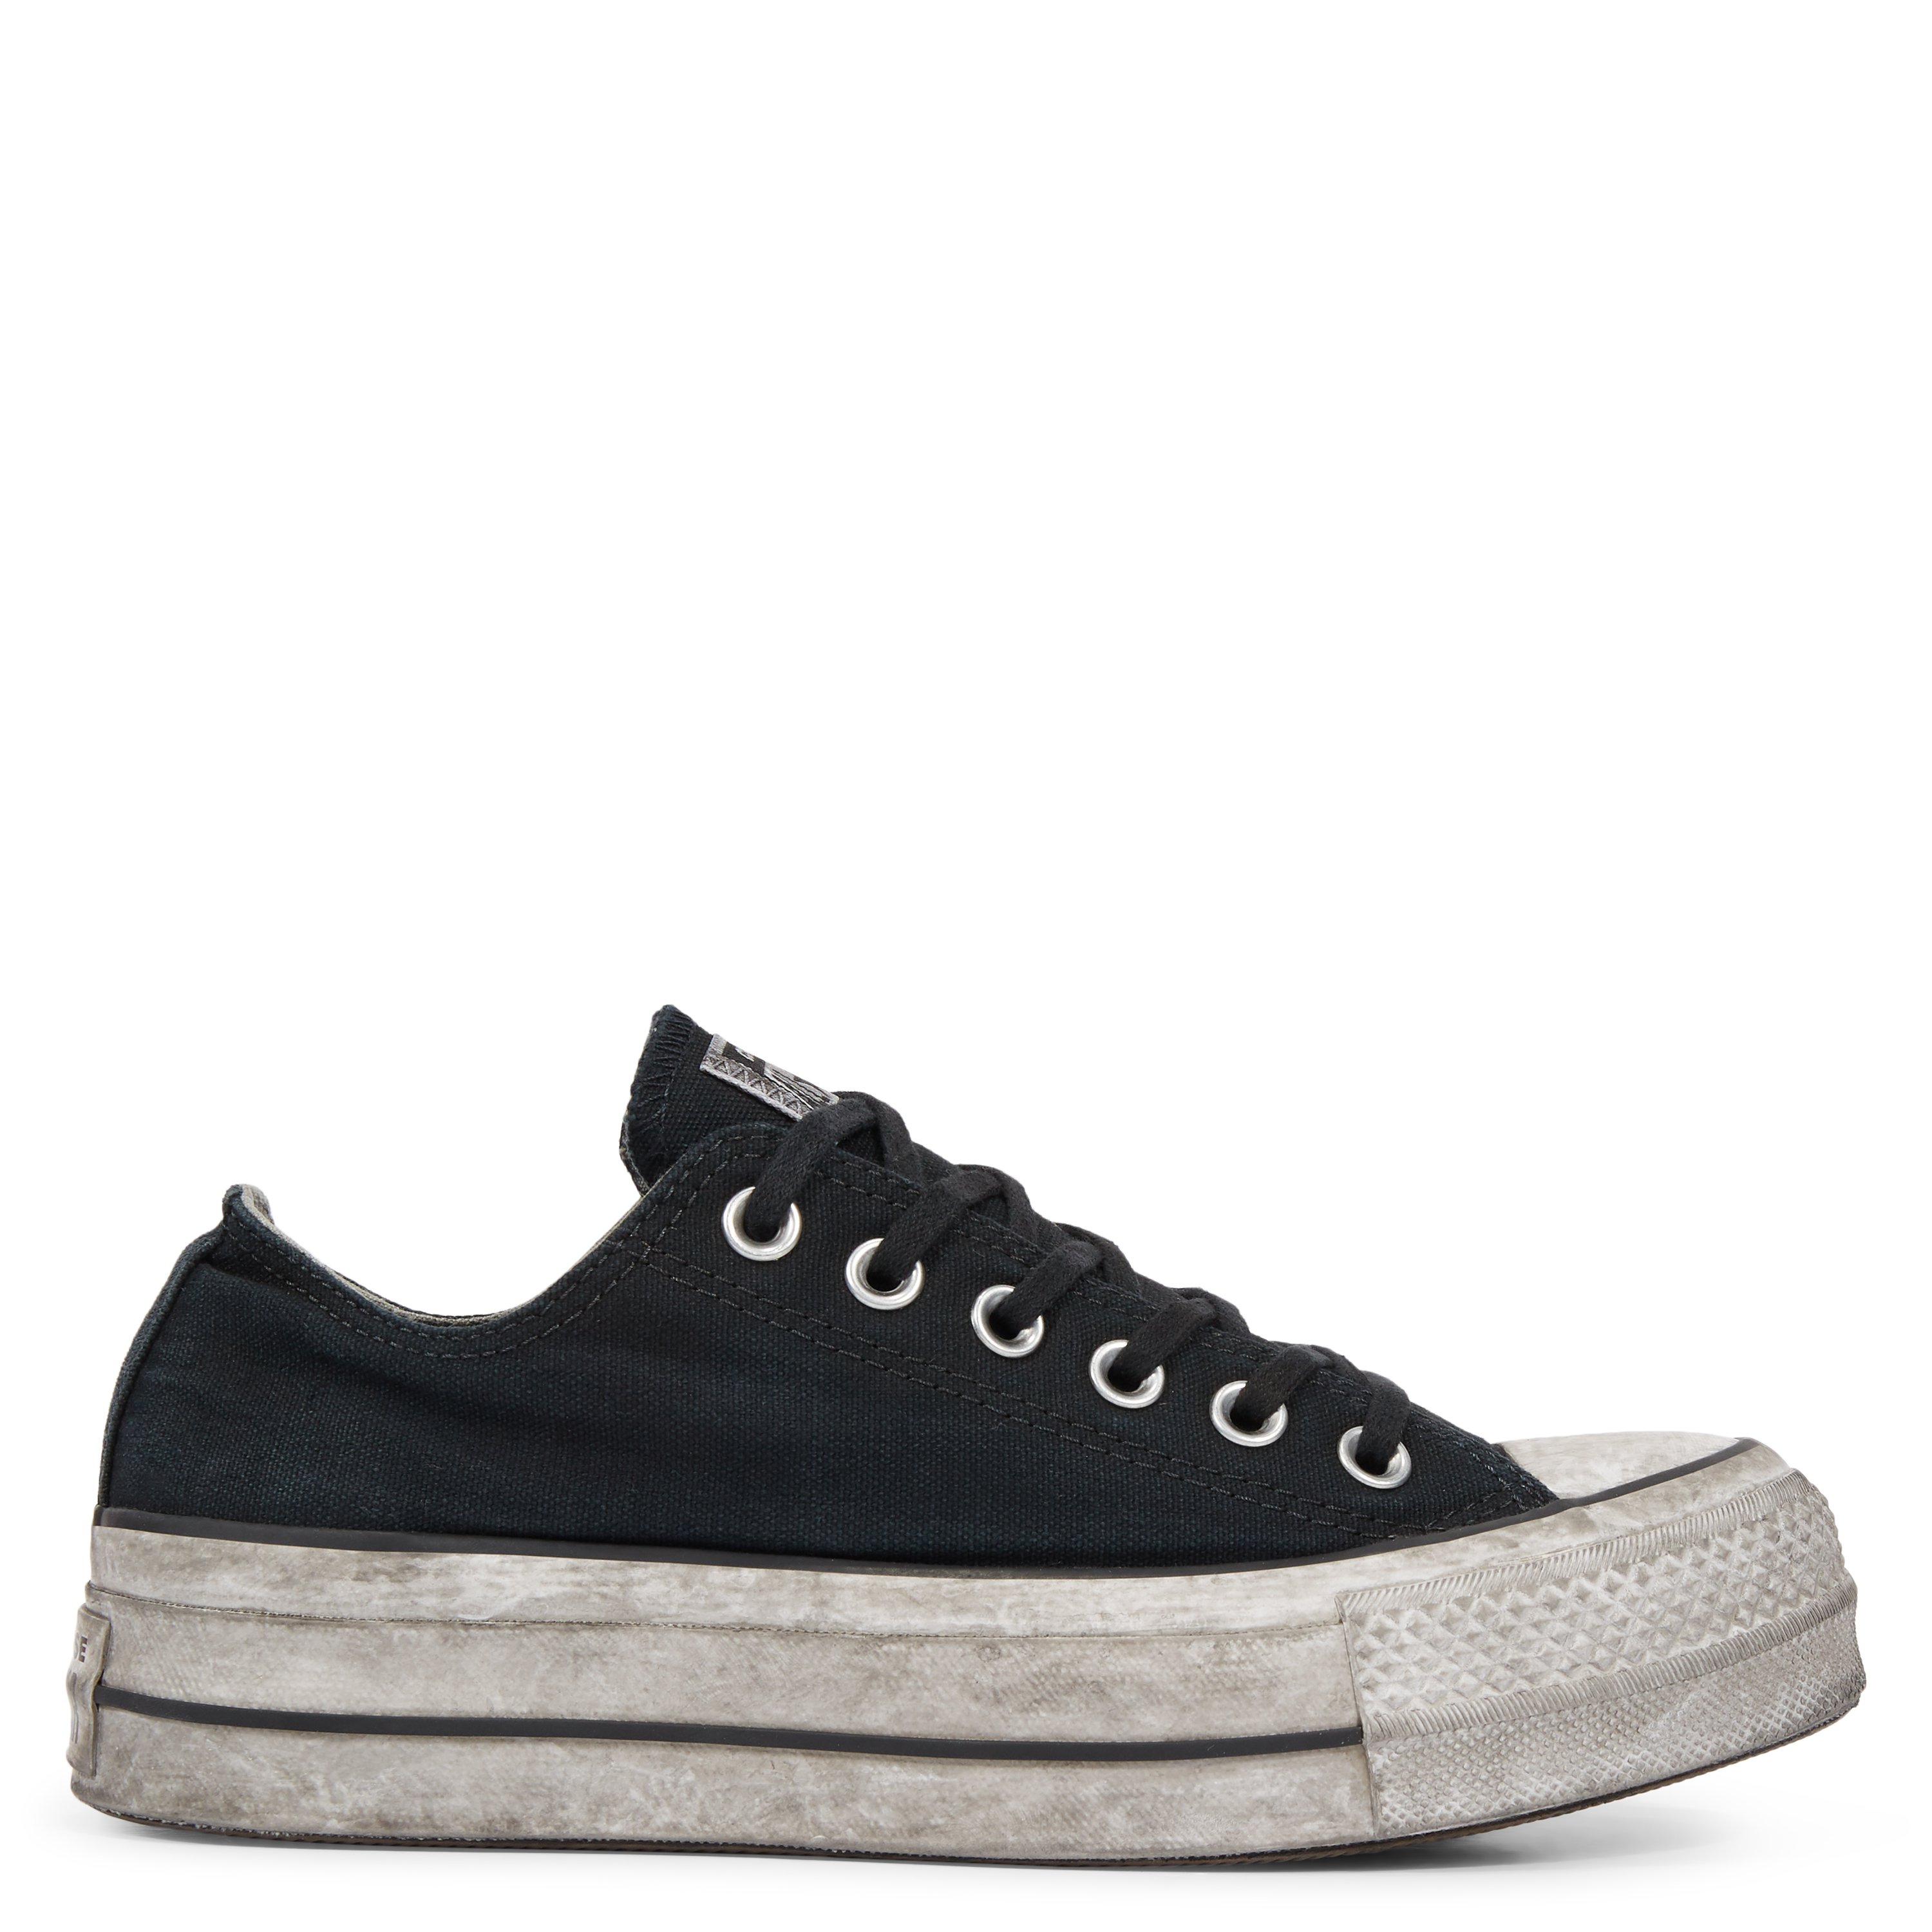 converse all star taille grand